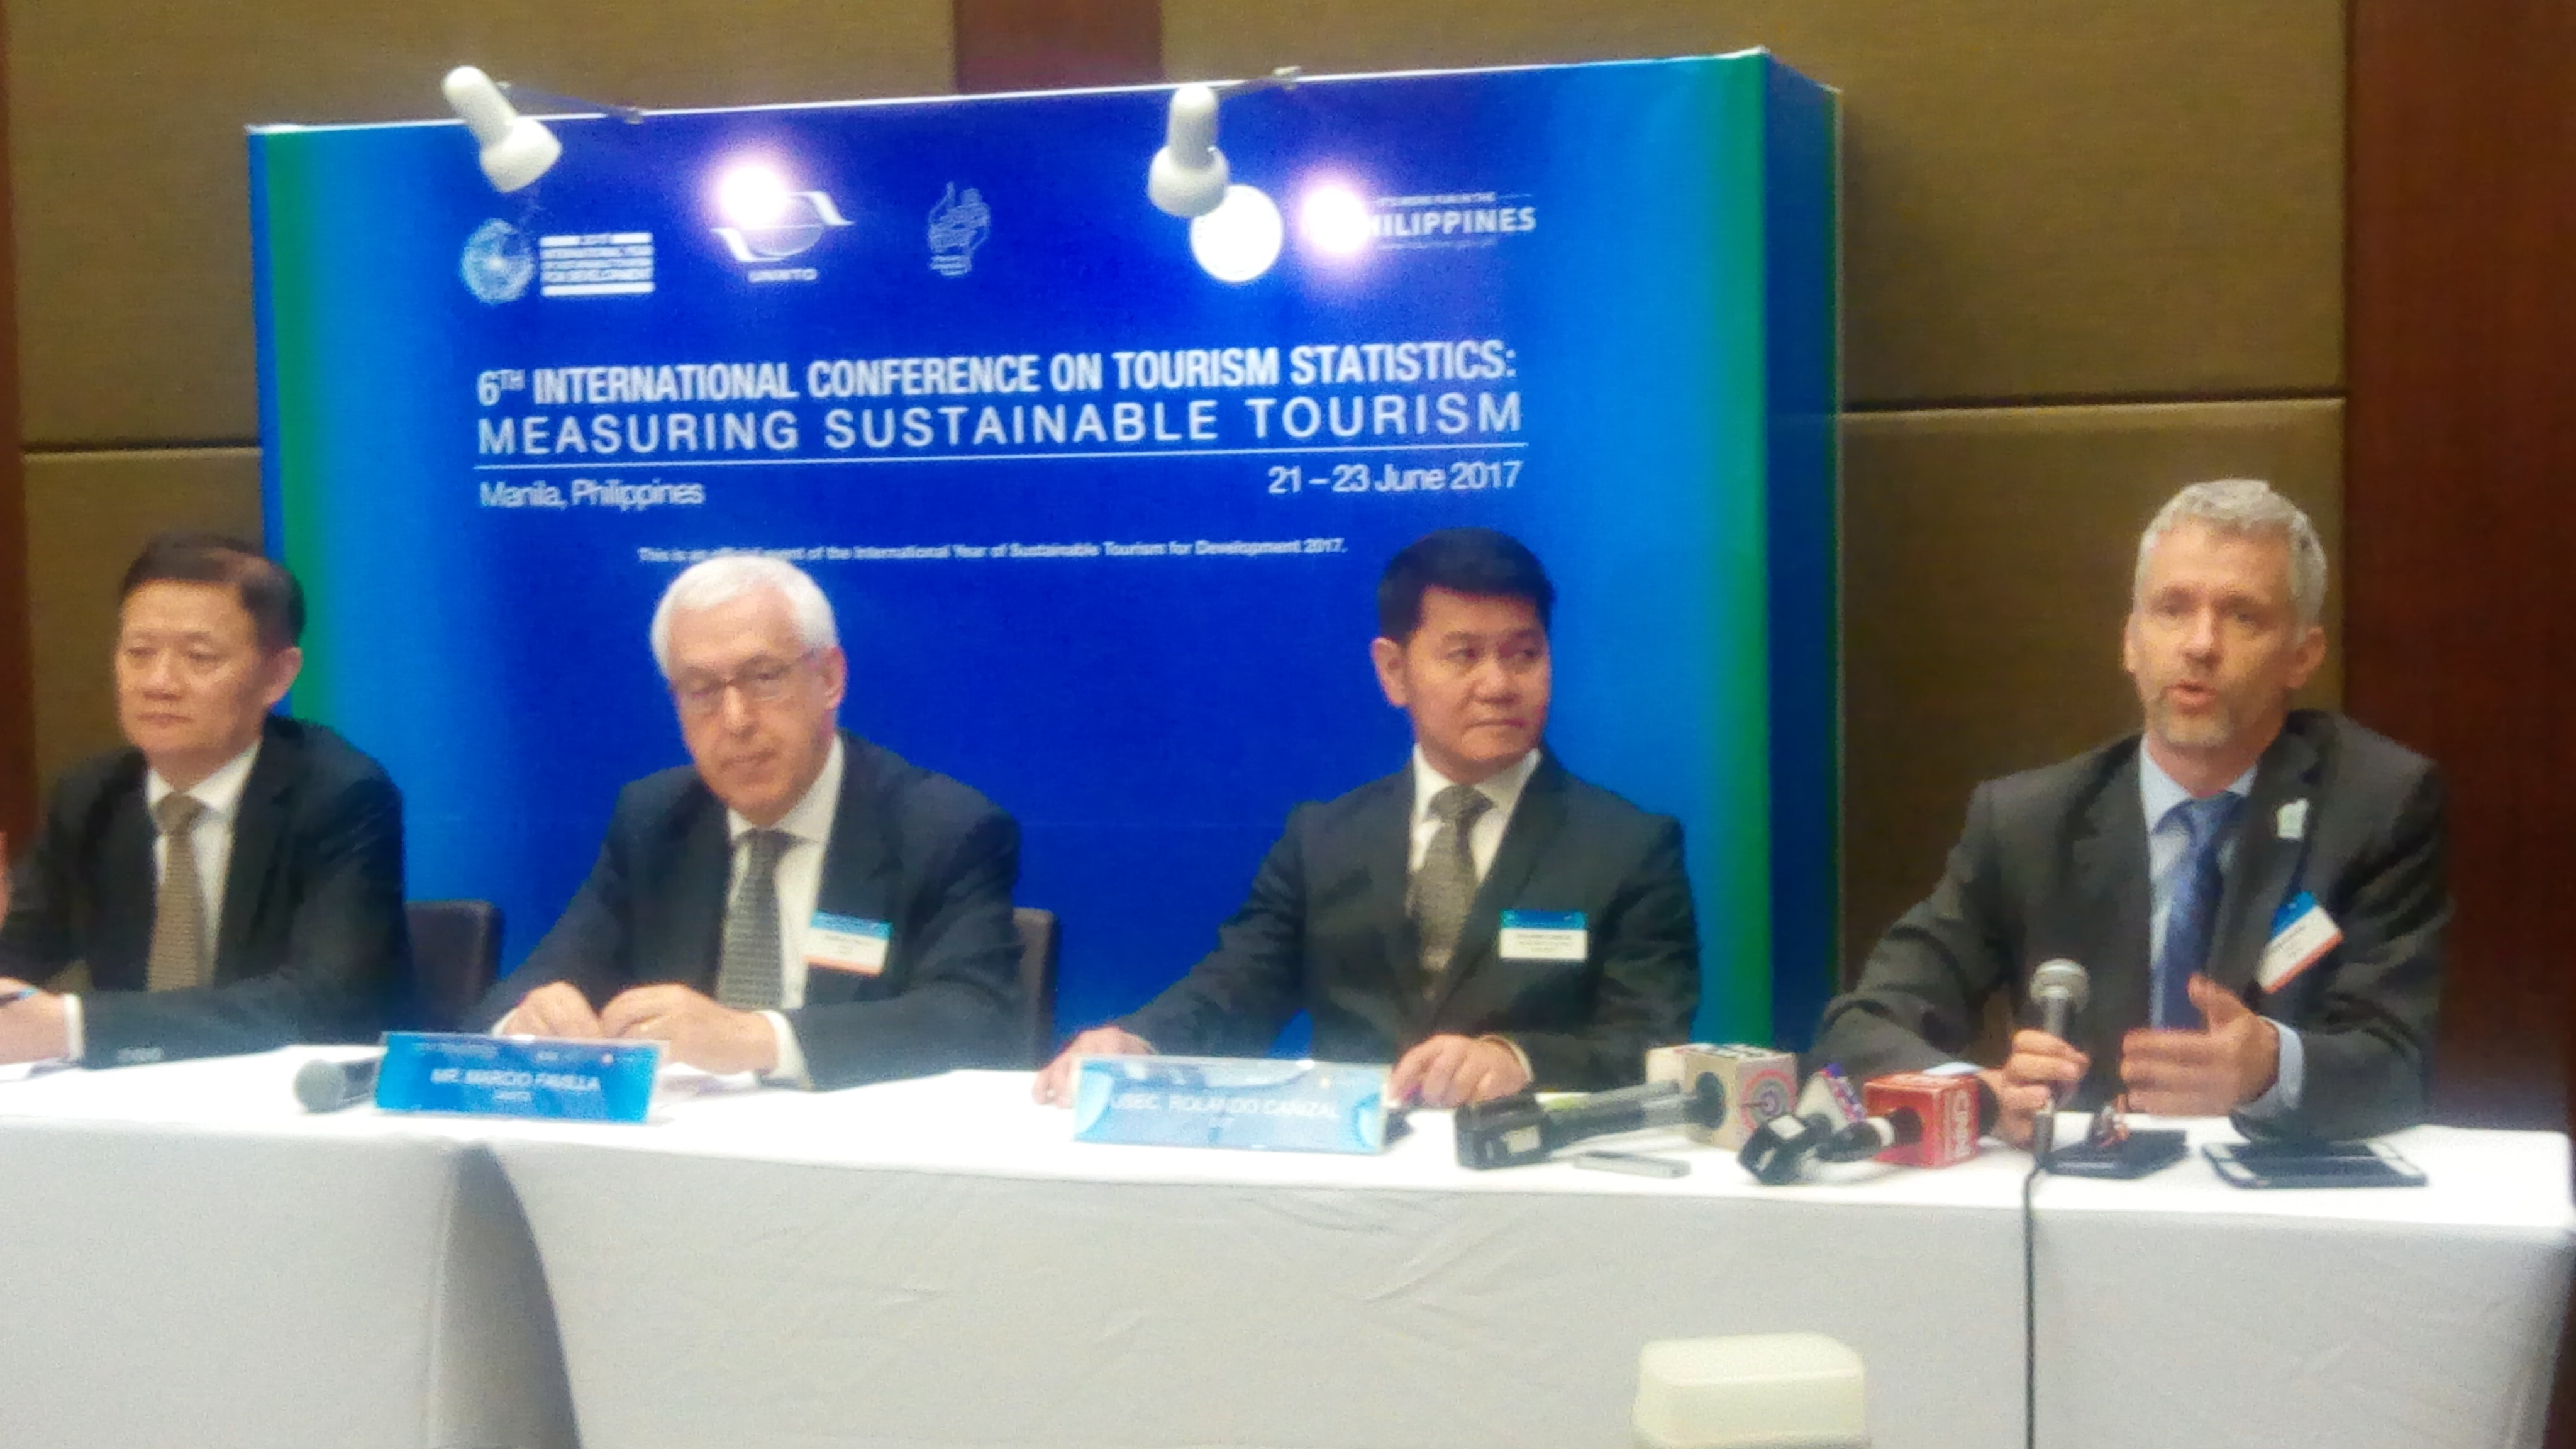 (L to R) Xu Jing, UNWTO Regional Director for the Asia-Pacific region; Marcio Favilla, Executive Director for Operational Programmes and Institutional Relations of the United Nations World Tourism Organization; Rolando Cañizal, Undersecretary for Administration and Special Concerns of the Philippine Department of Tourism; John Kesster, UNWTO Statitstician.